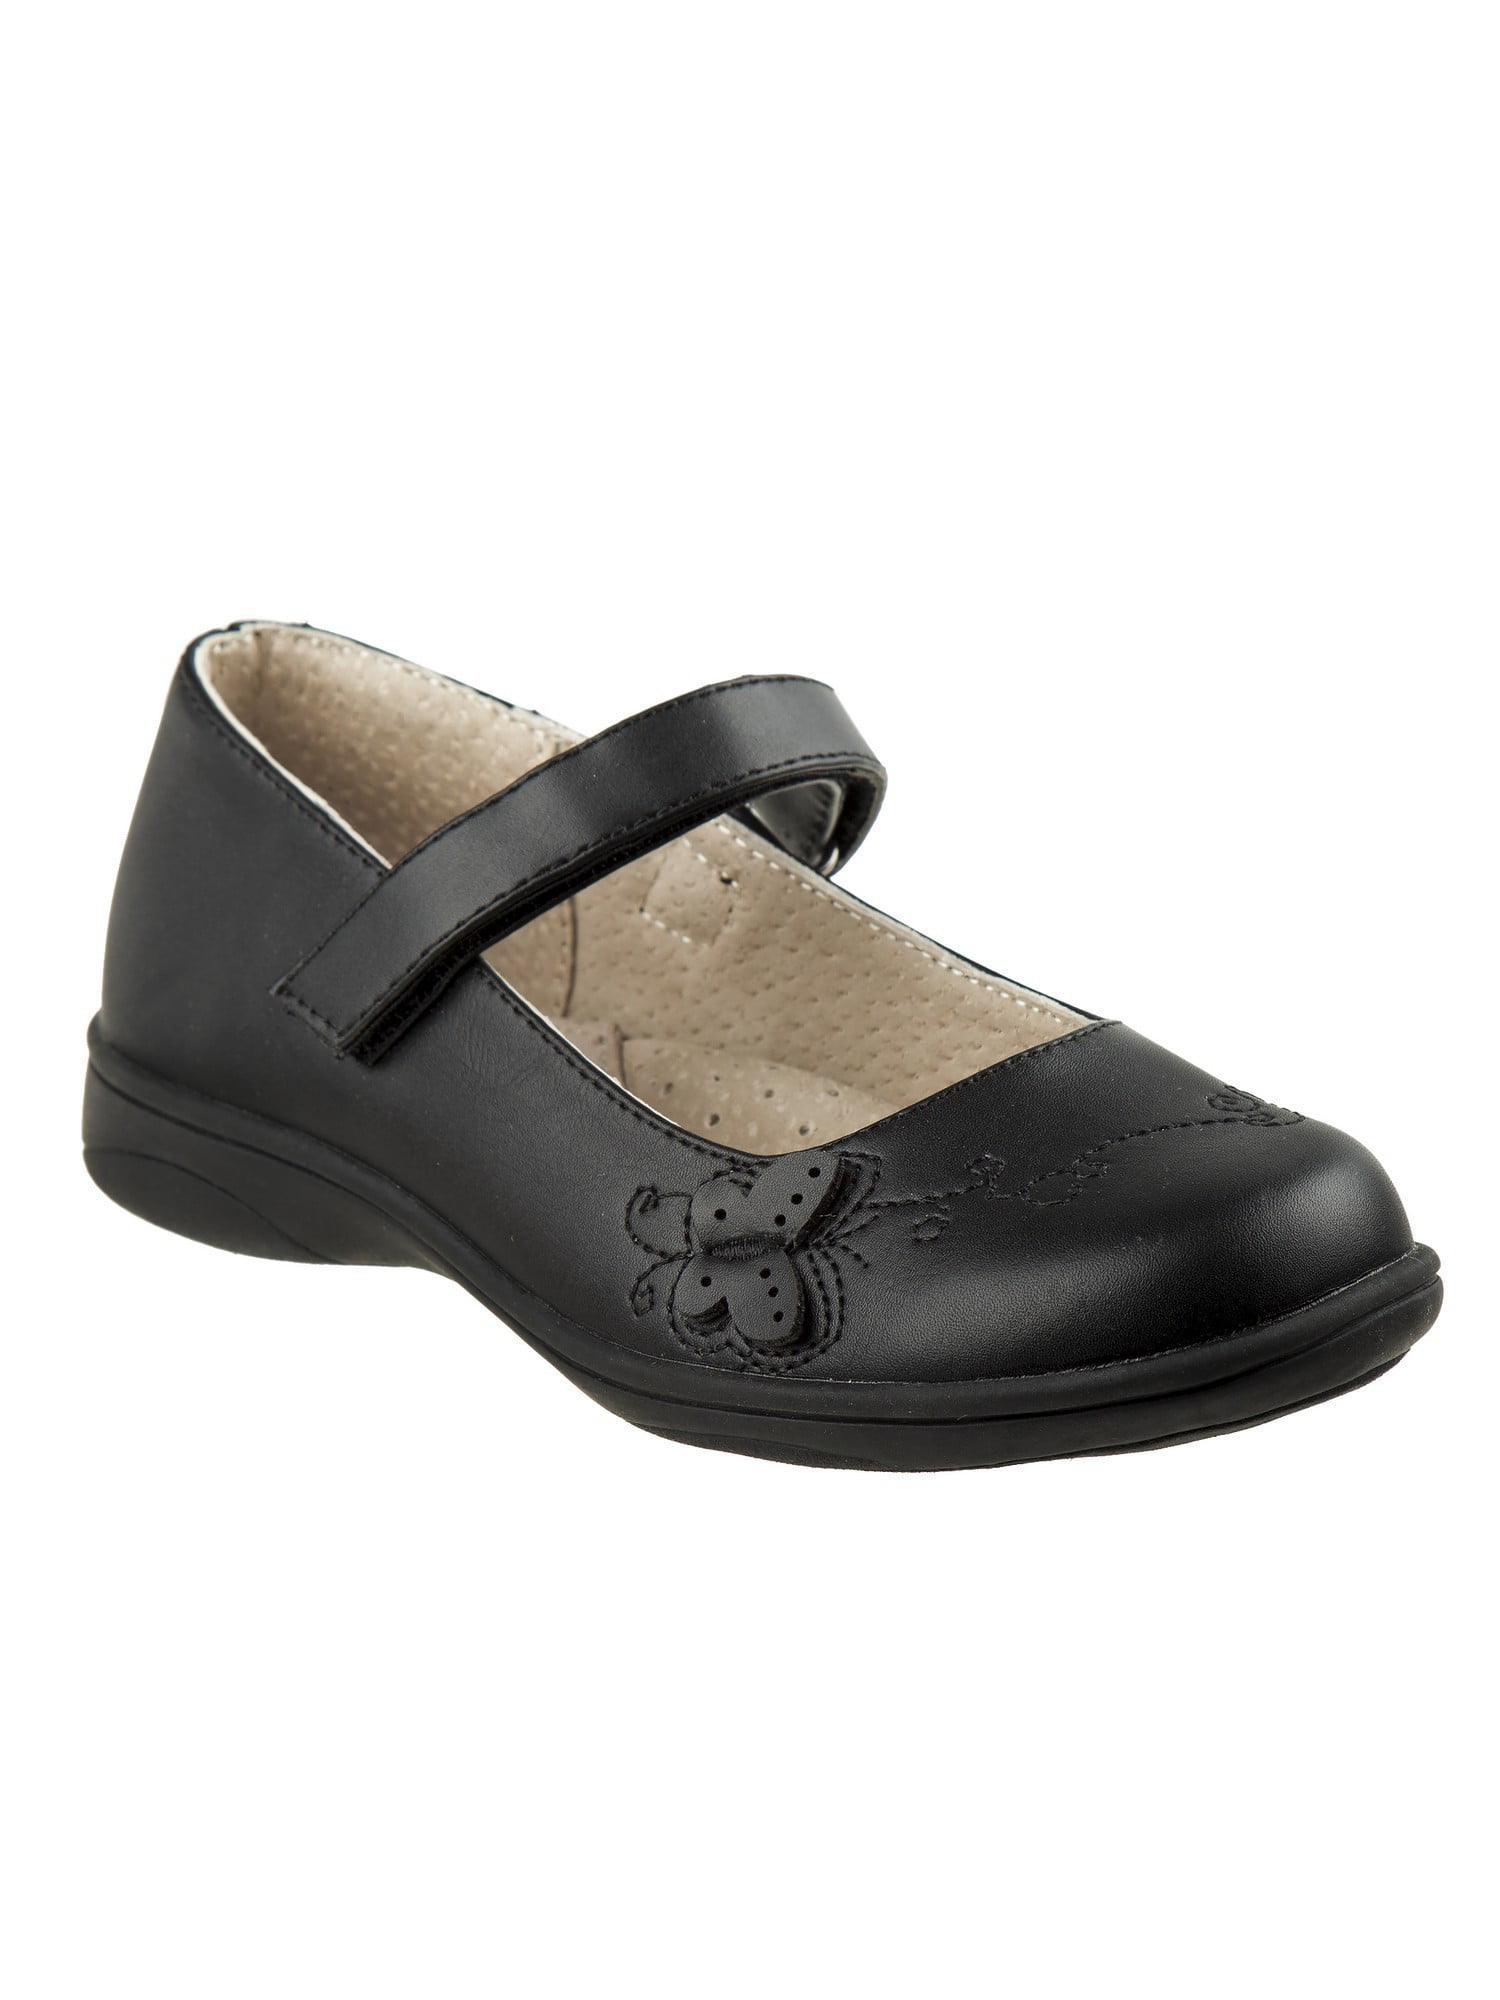 Girls Black Patent School Shoes Kids T Bar Mary Jane Touch Strap Size 6-12 